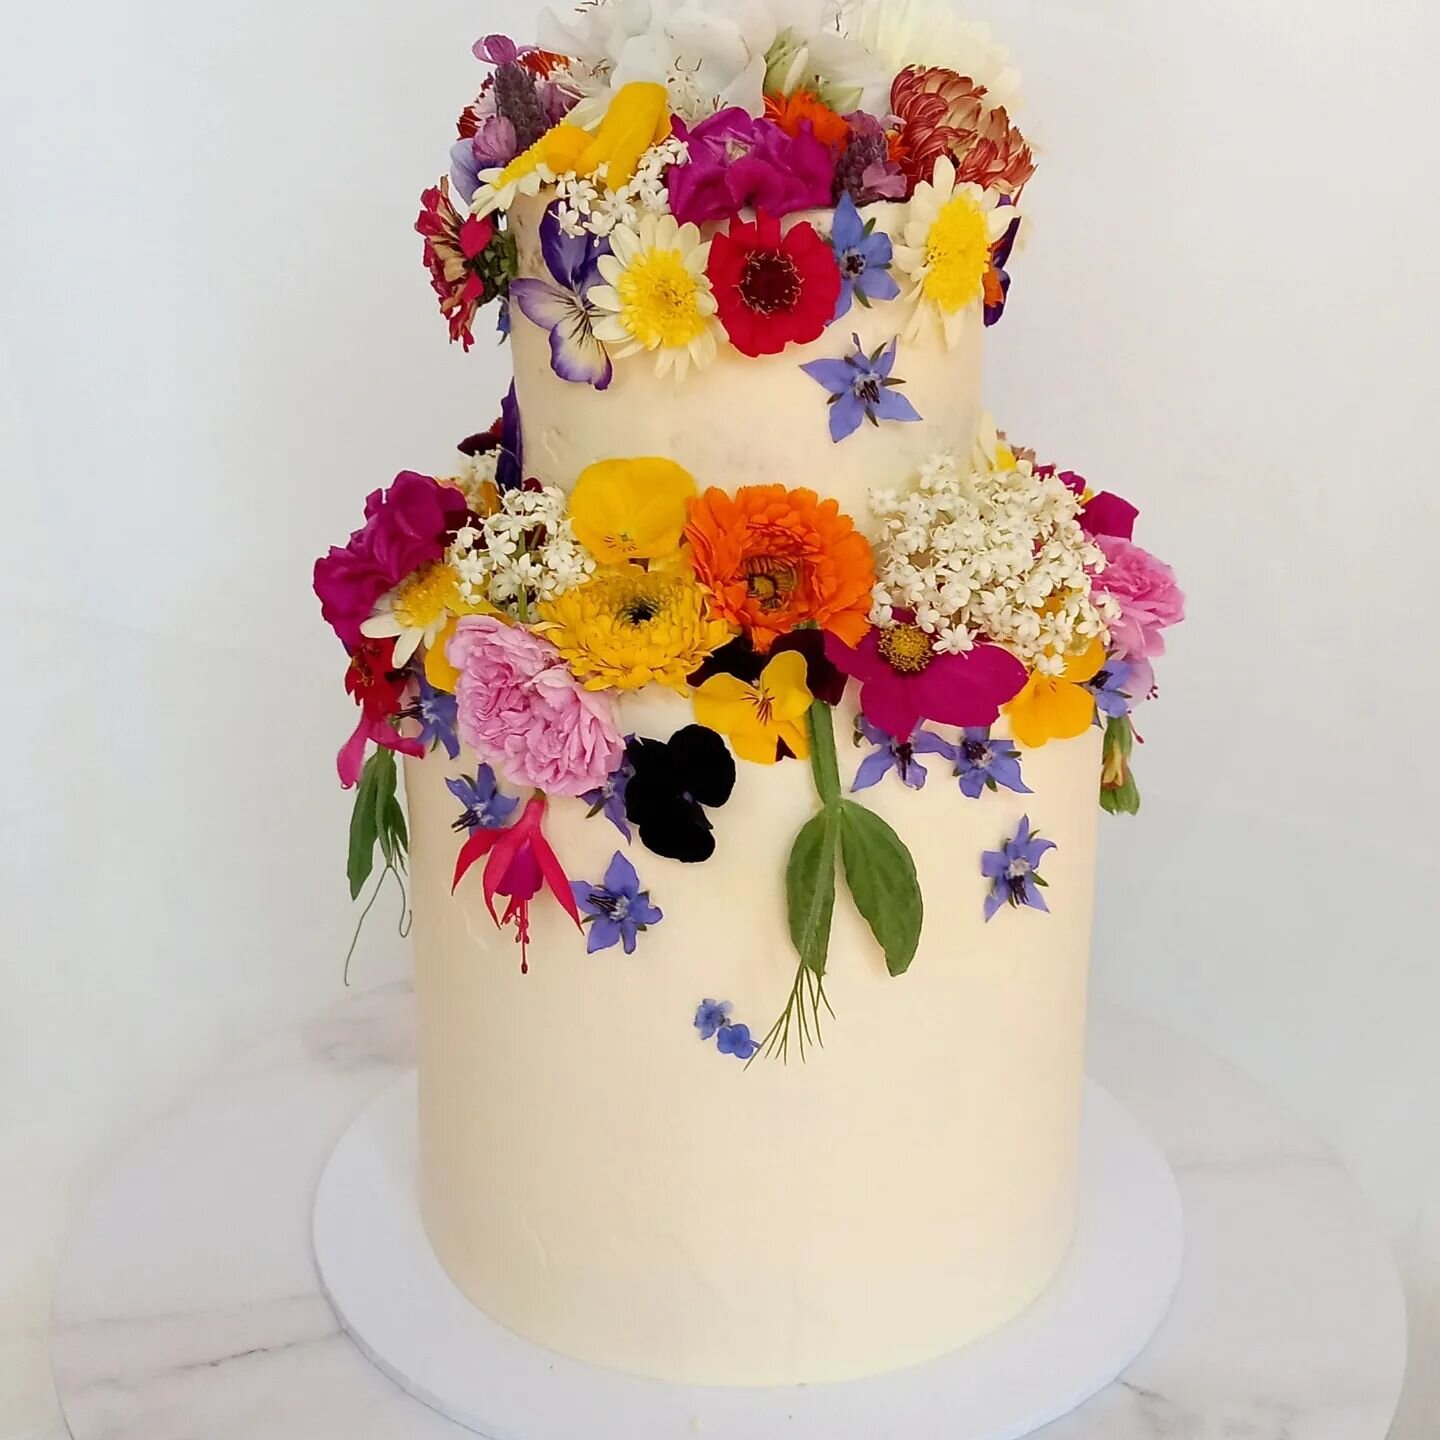 Still one of my all time favourites......

For your next edible flower cake or cupcakes, please visit our website or email us at laviolettebakehouse@gmail.com